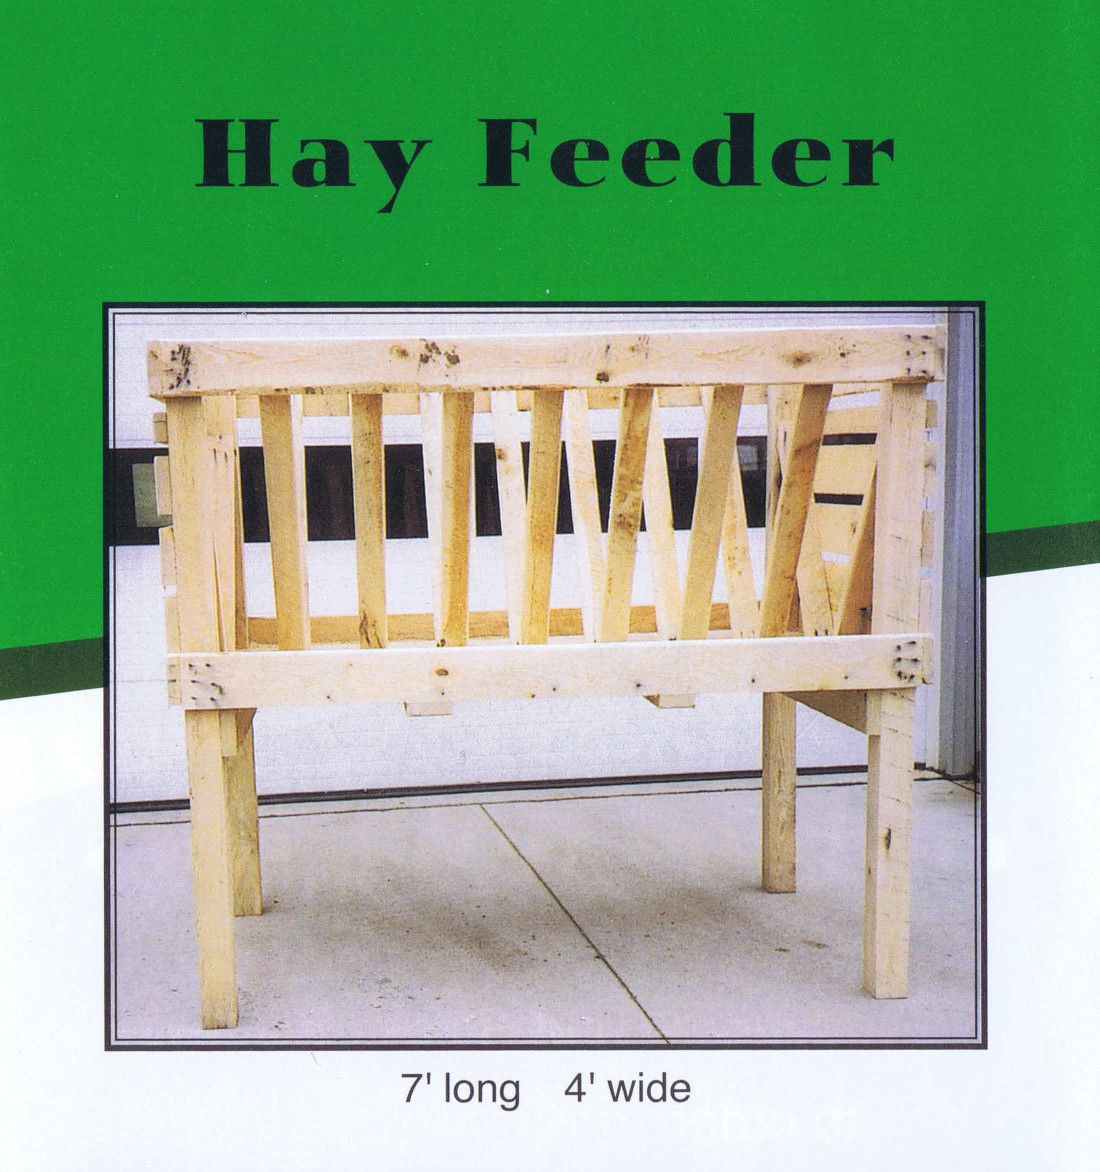 Hay feeder picture